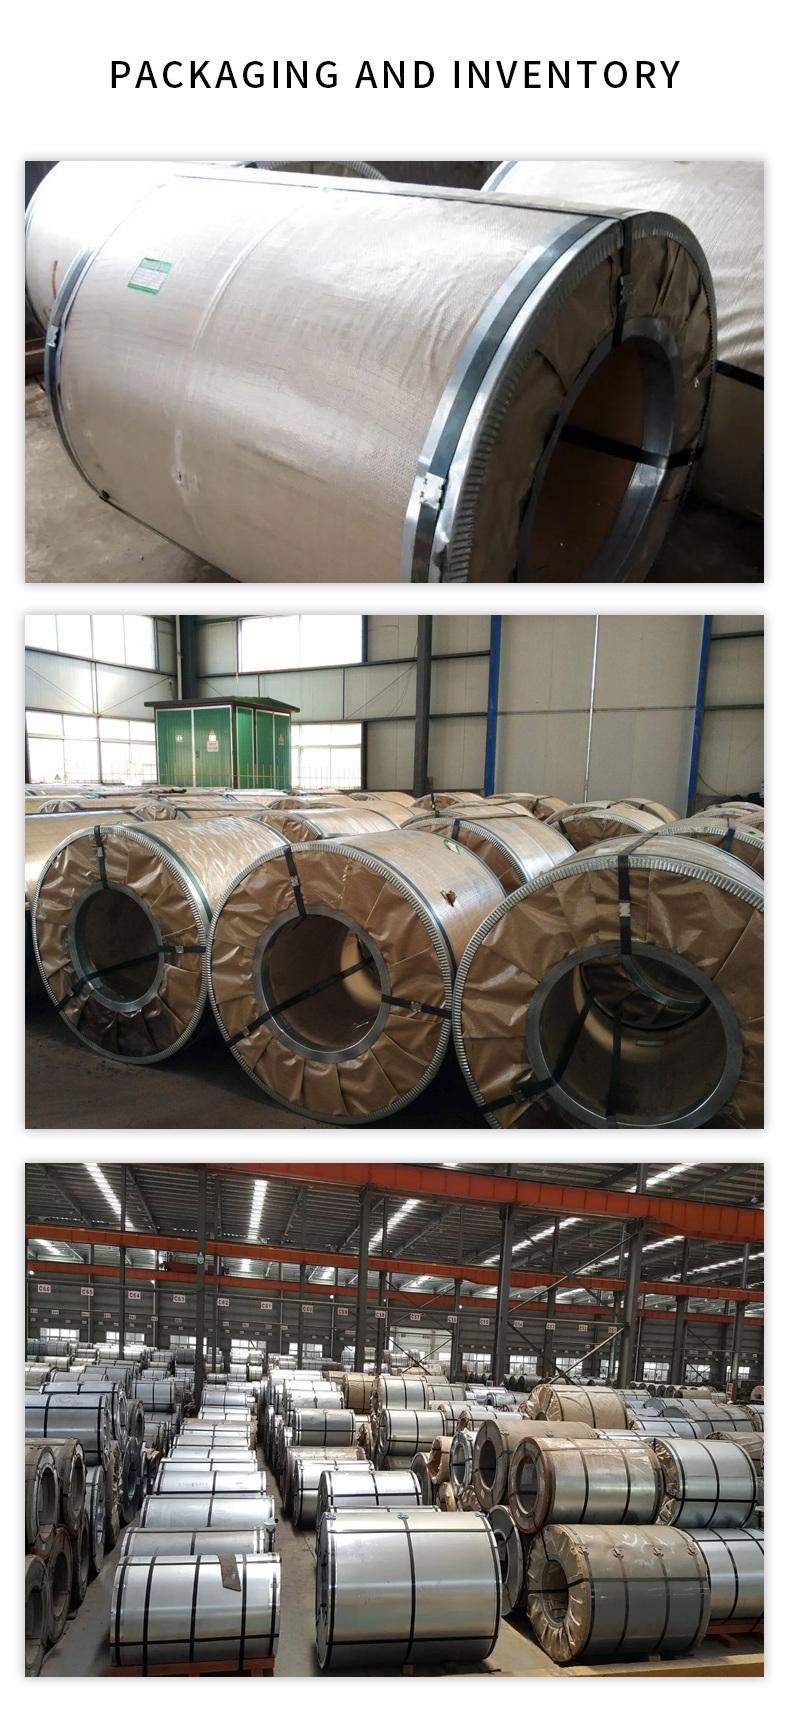 DC01,DC02,DC03,DC04,DC05,DC06,SPCC Cold Rolled Steel Plate/Sheet/Coil/Strip #4 Finish High Quality SPCC Carbon Steel Coil High Carbon Strength Hot Rolled Carbon